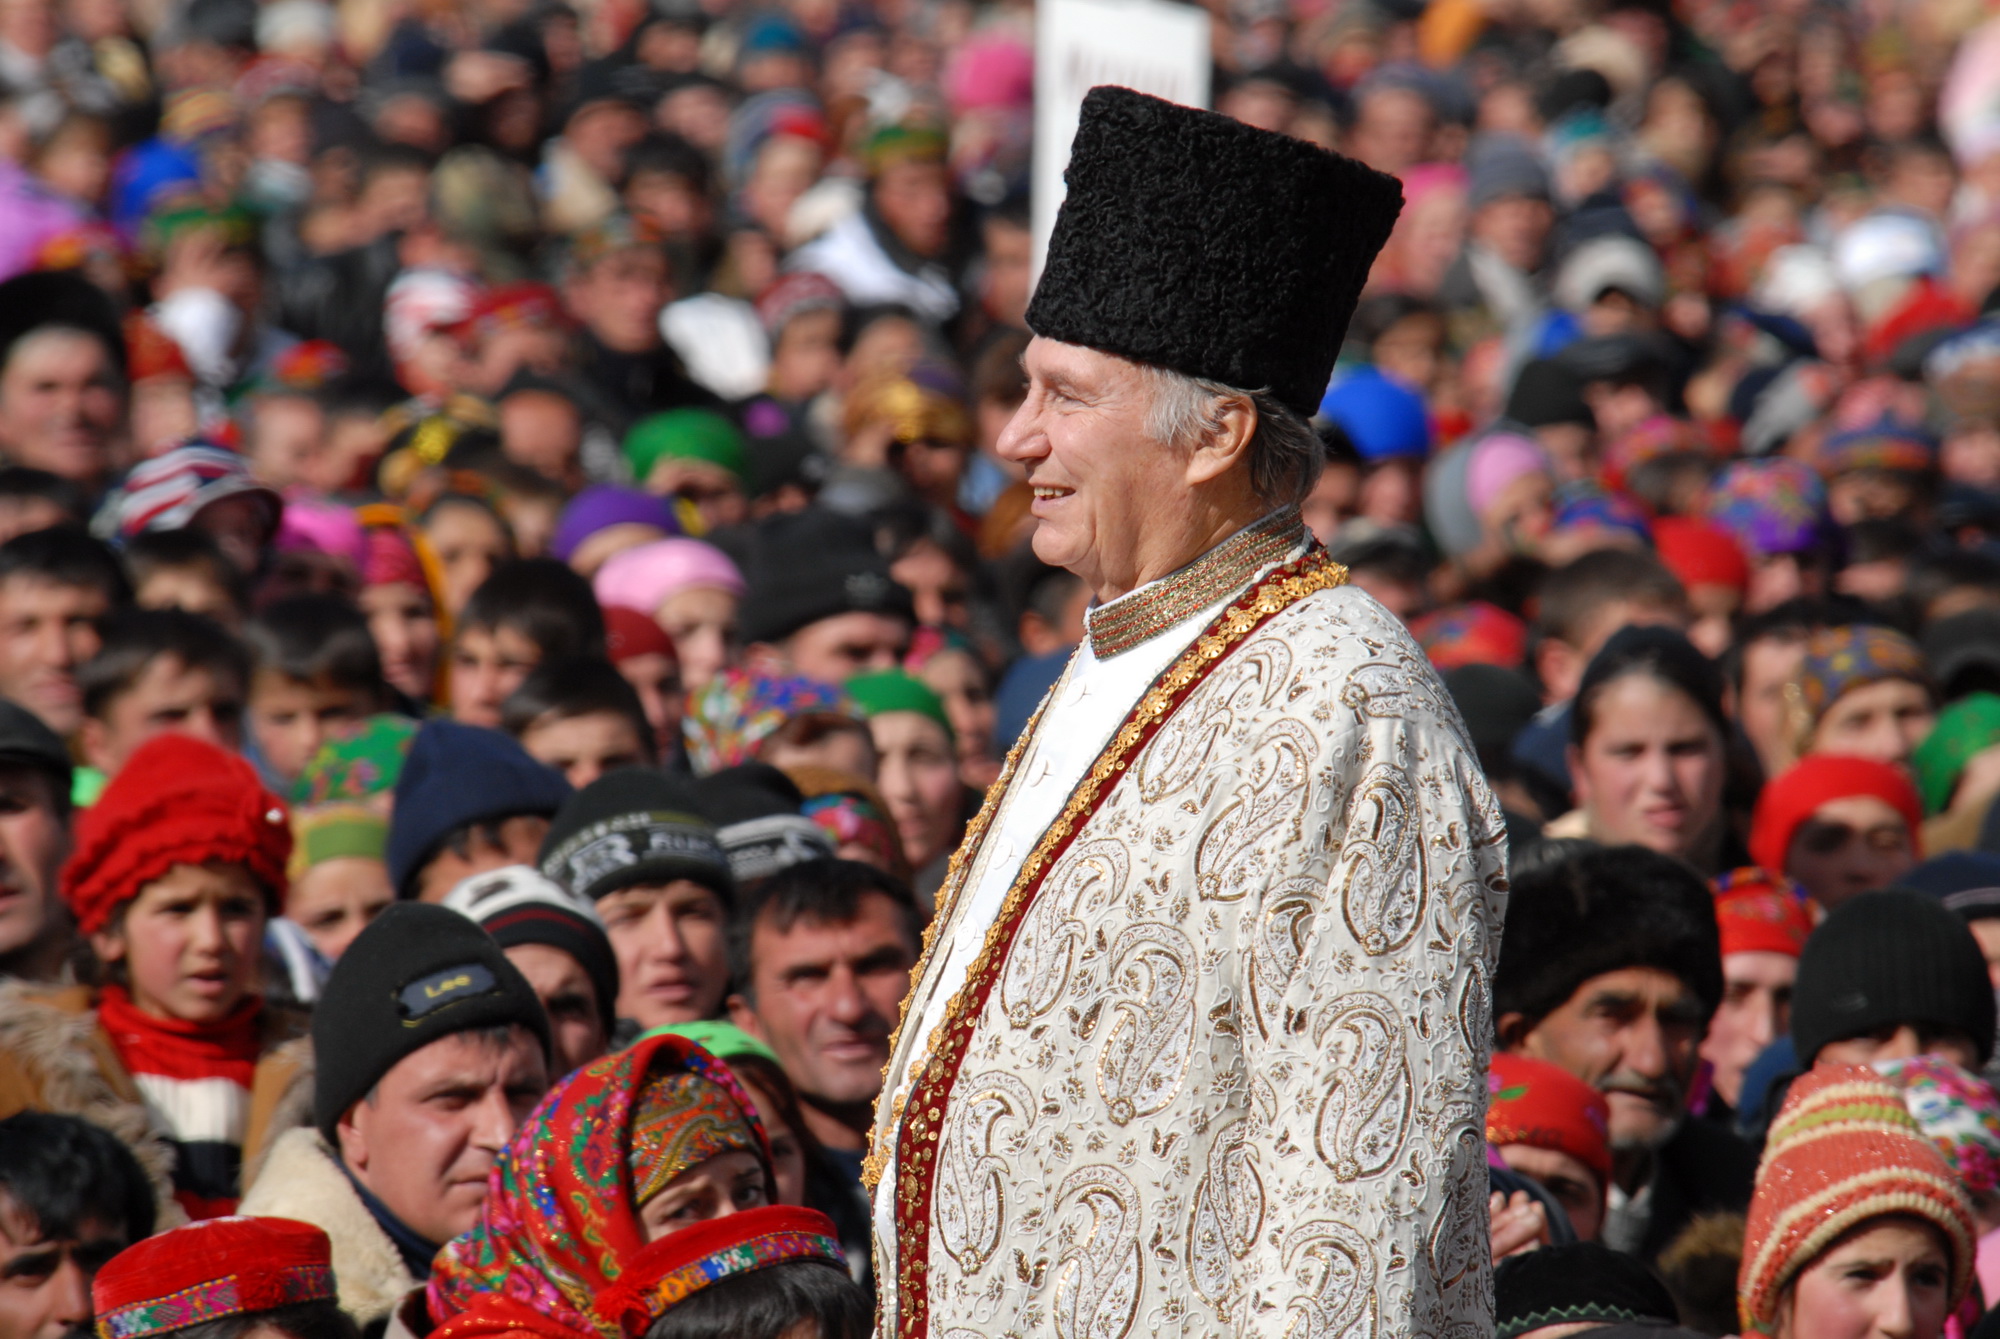 In Tajikistan, several thousand members of the Jamat came together for Mawlana Hazar Imam's visit.